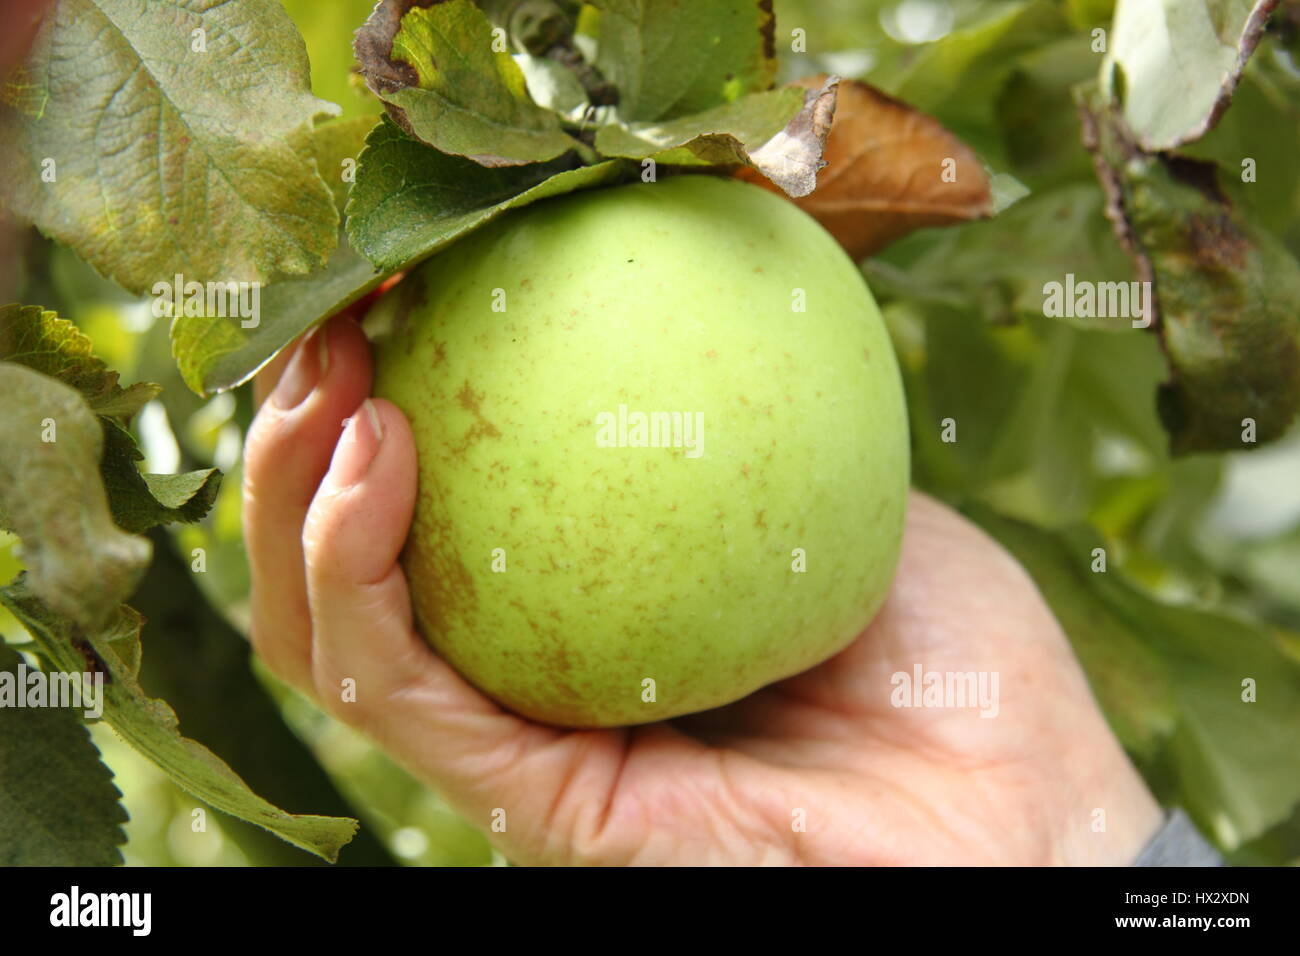 Picking a ripe apple by gently lifting and twisting the fruit in a cupped hand, UK Stock Photo